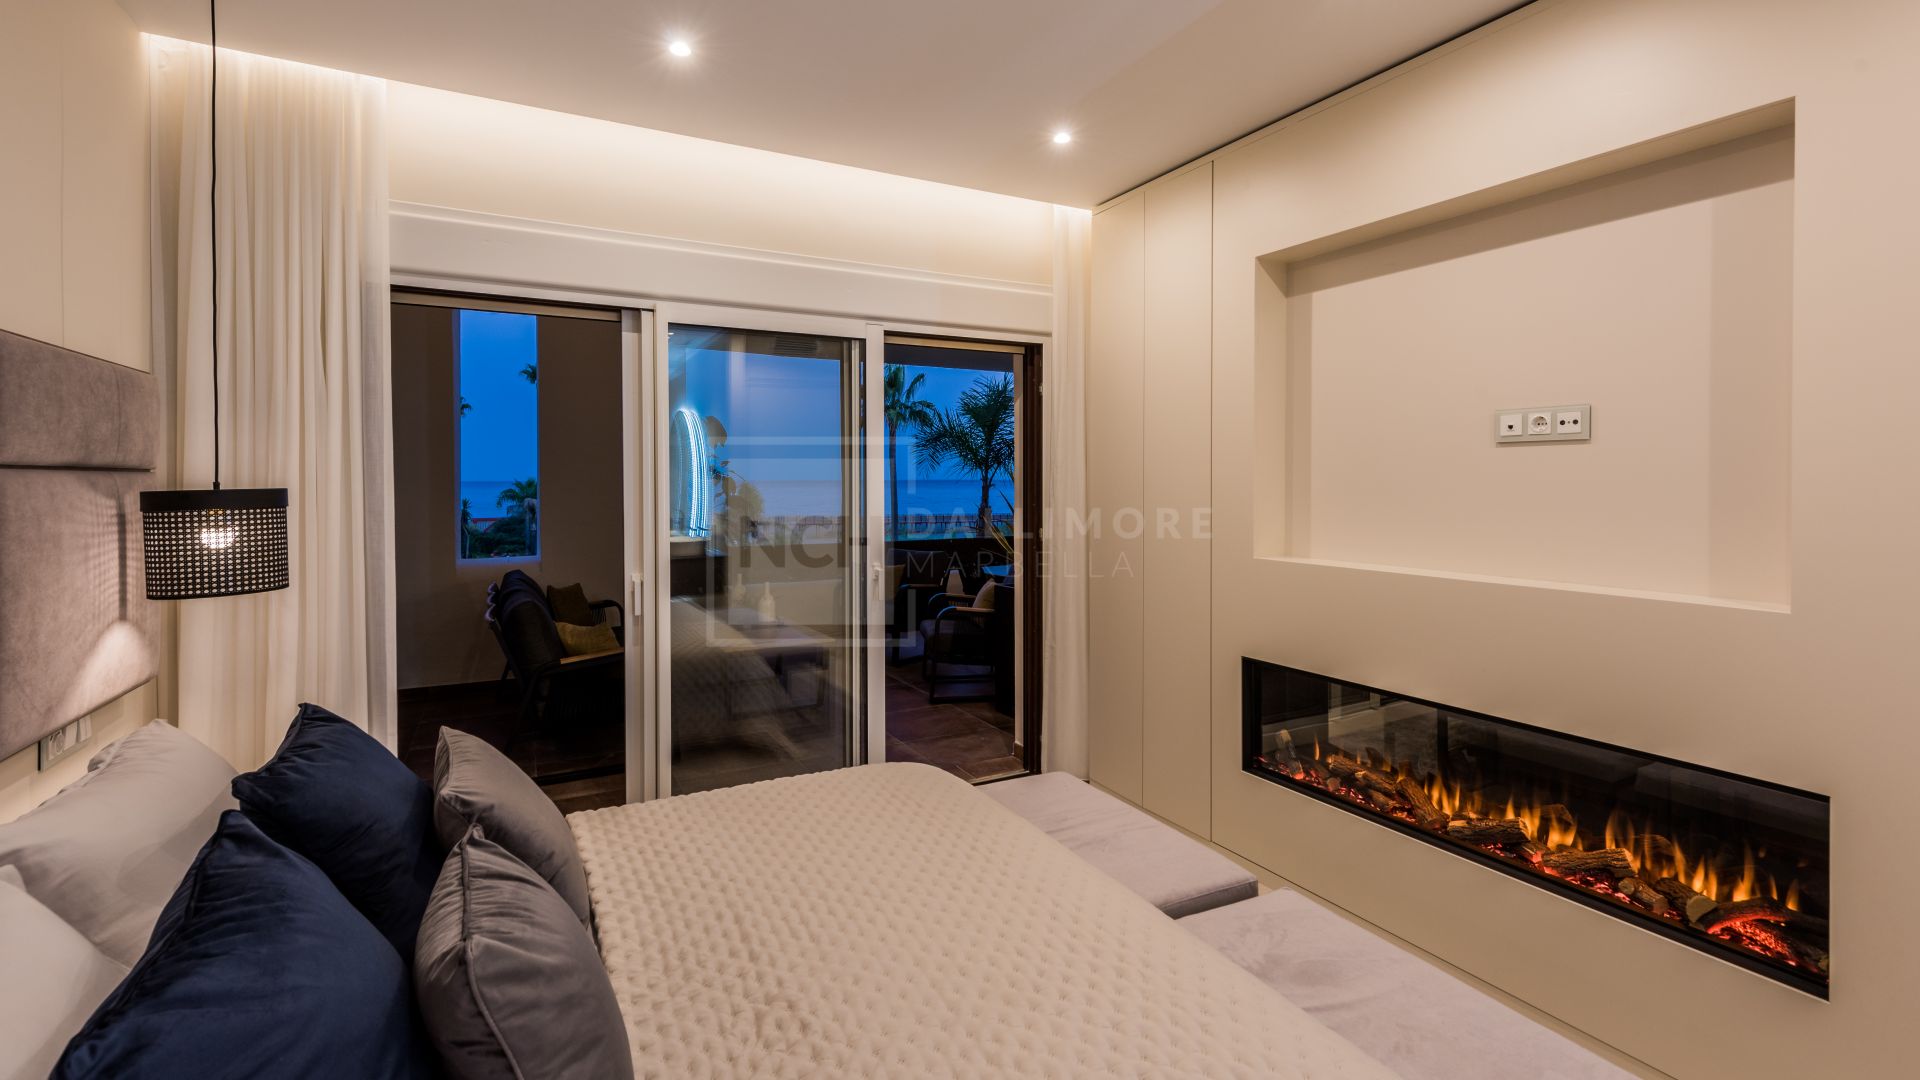 SPECTACULAR FRONTLINE BEACH APARTMENT LOCATED ON THE NEW GOLDEN MILE, ESTEPONA